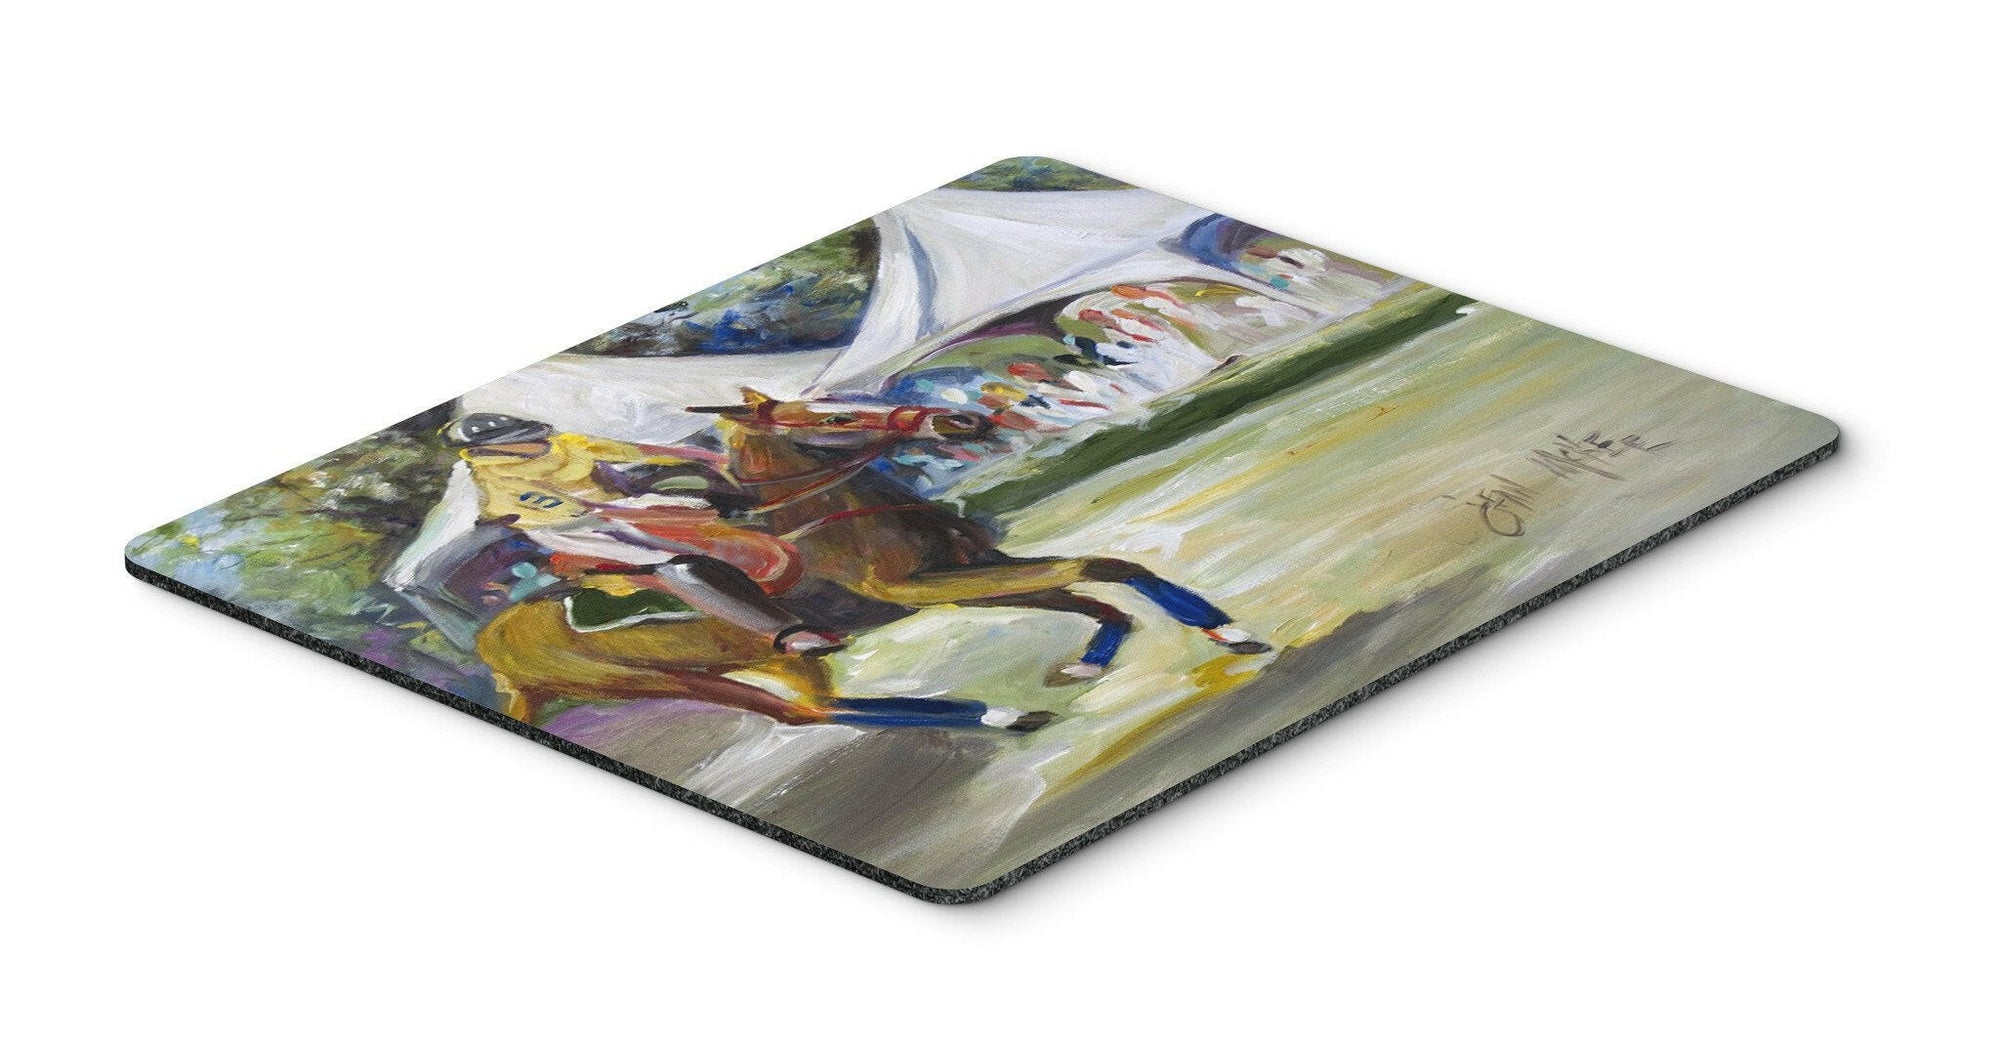 Polo at the Point Mouse Pad, Hot Pad or Trivet JMK1008MP by Caroline's Treasures